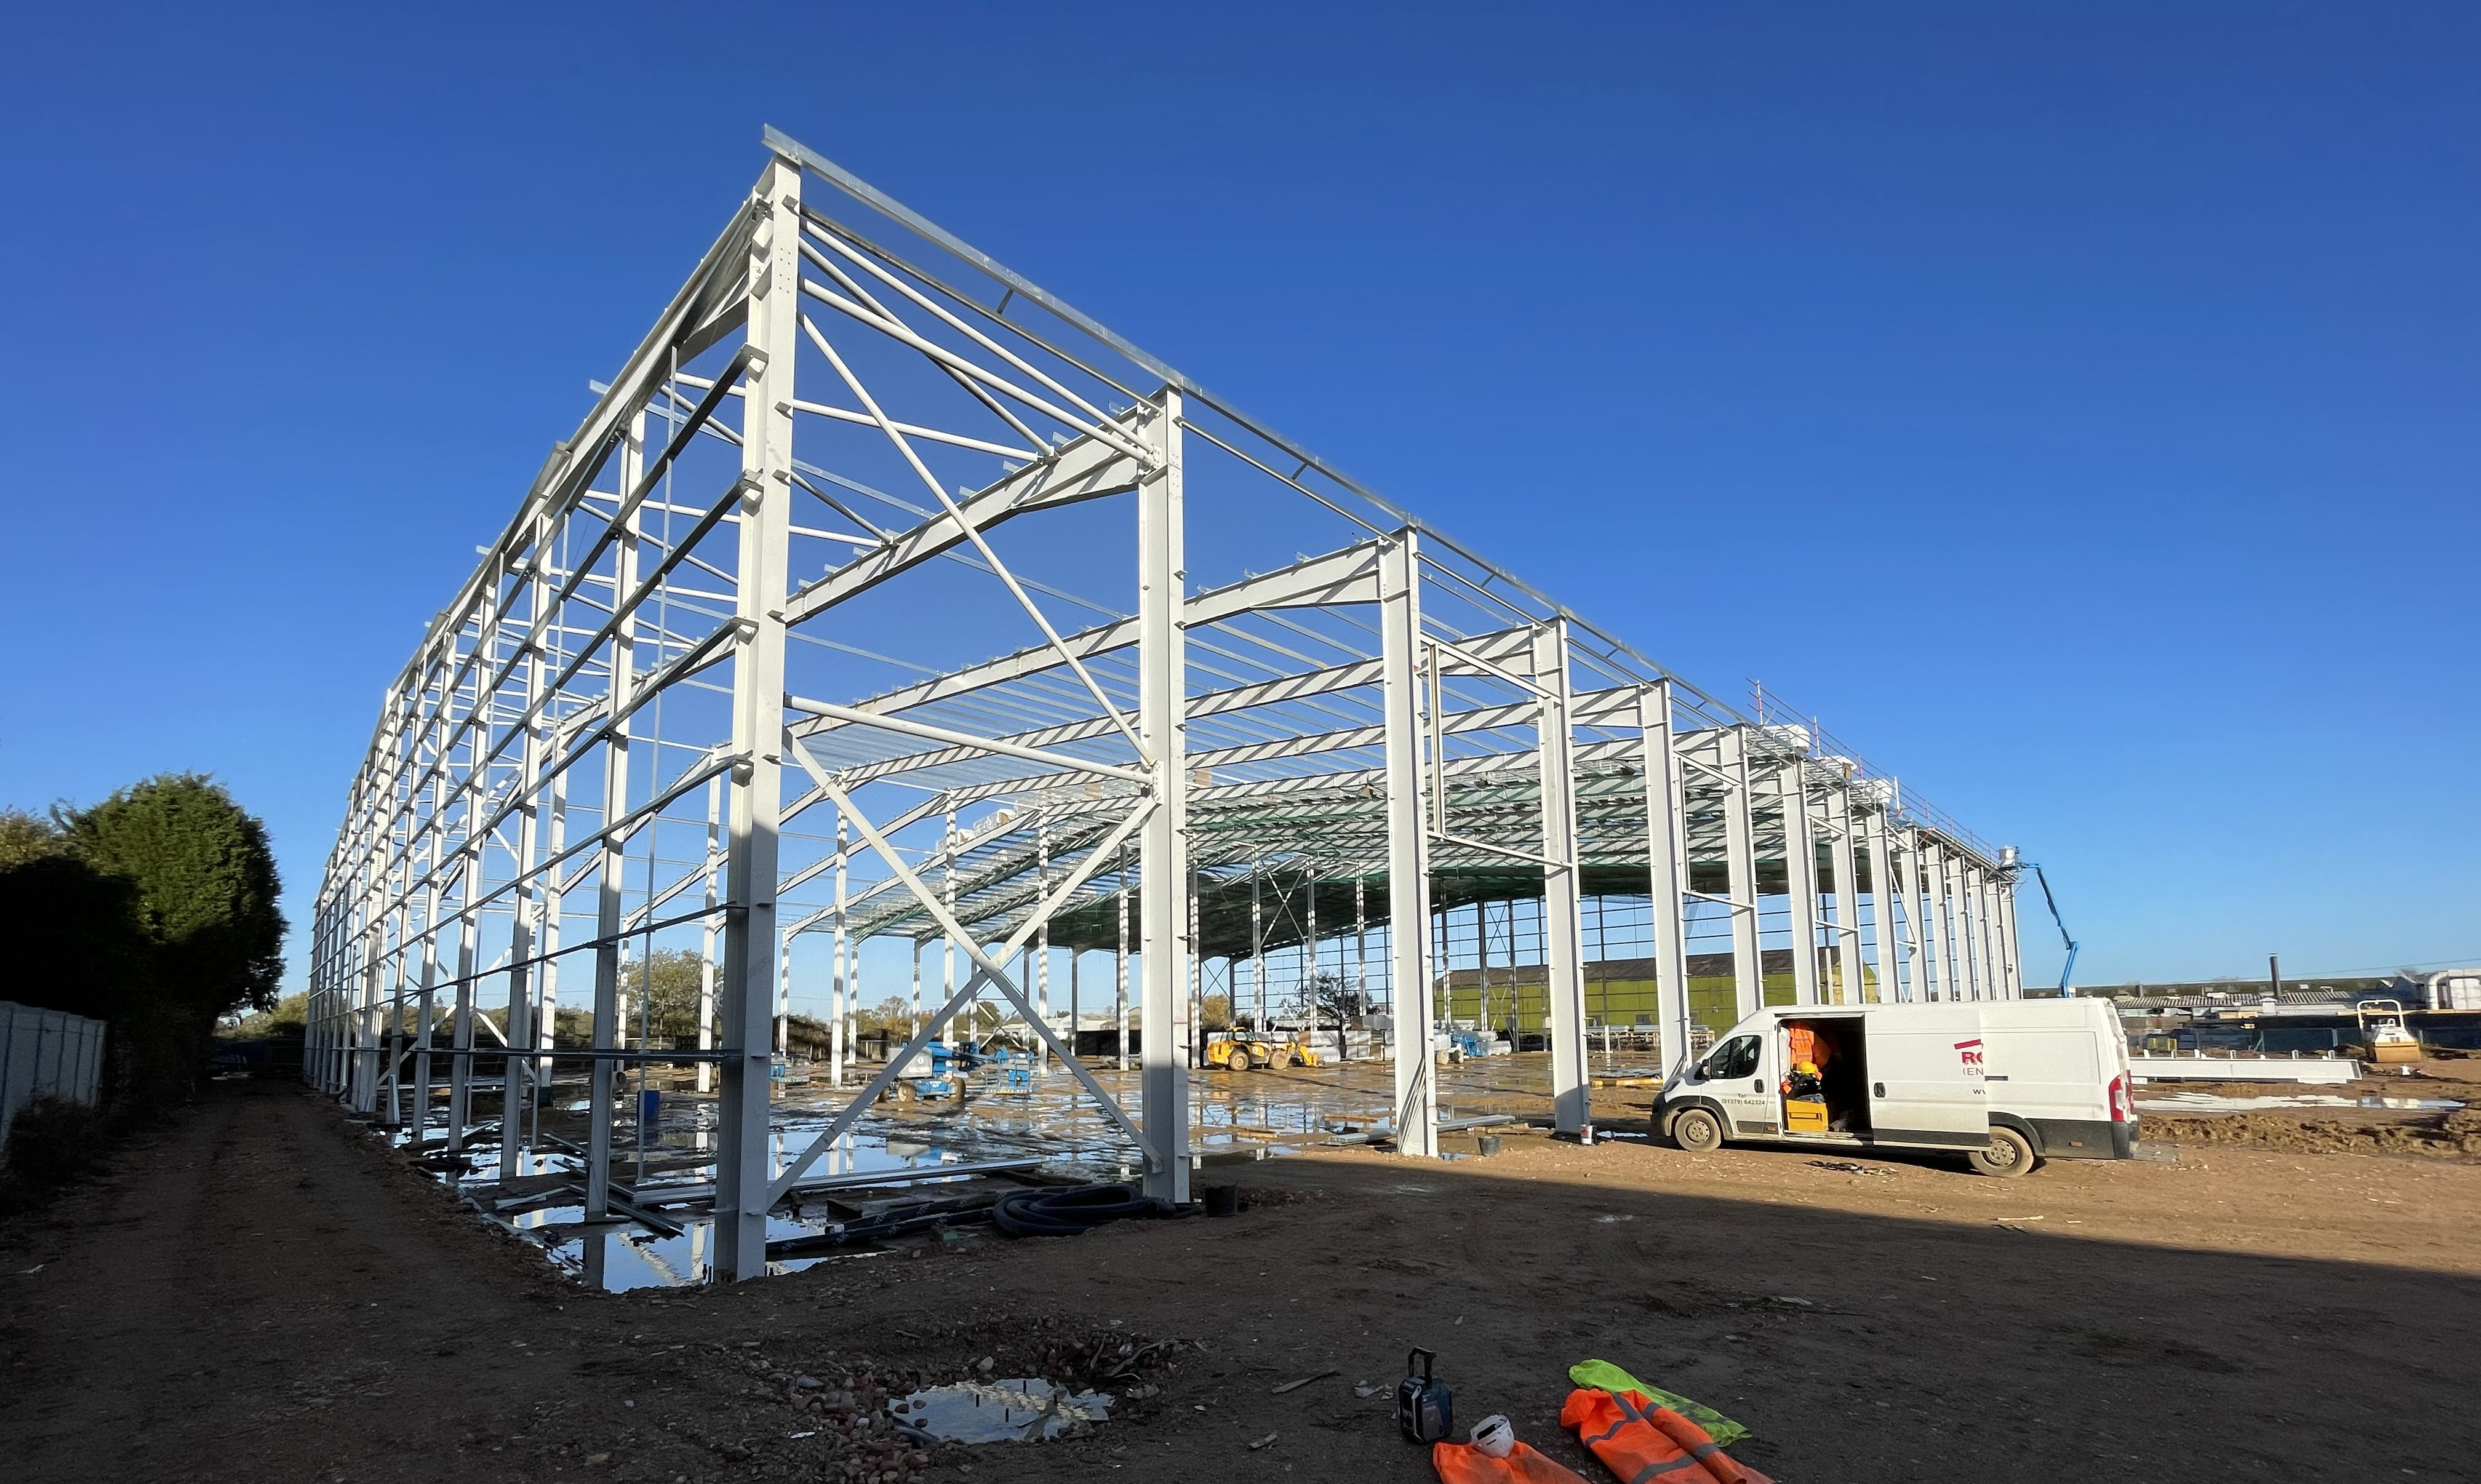 The Steel frame of the Bartrum Group's Warehouse and Distribution centre in Diss.